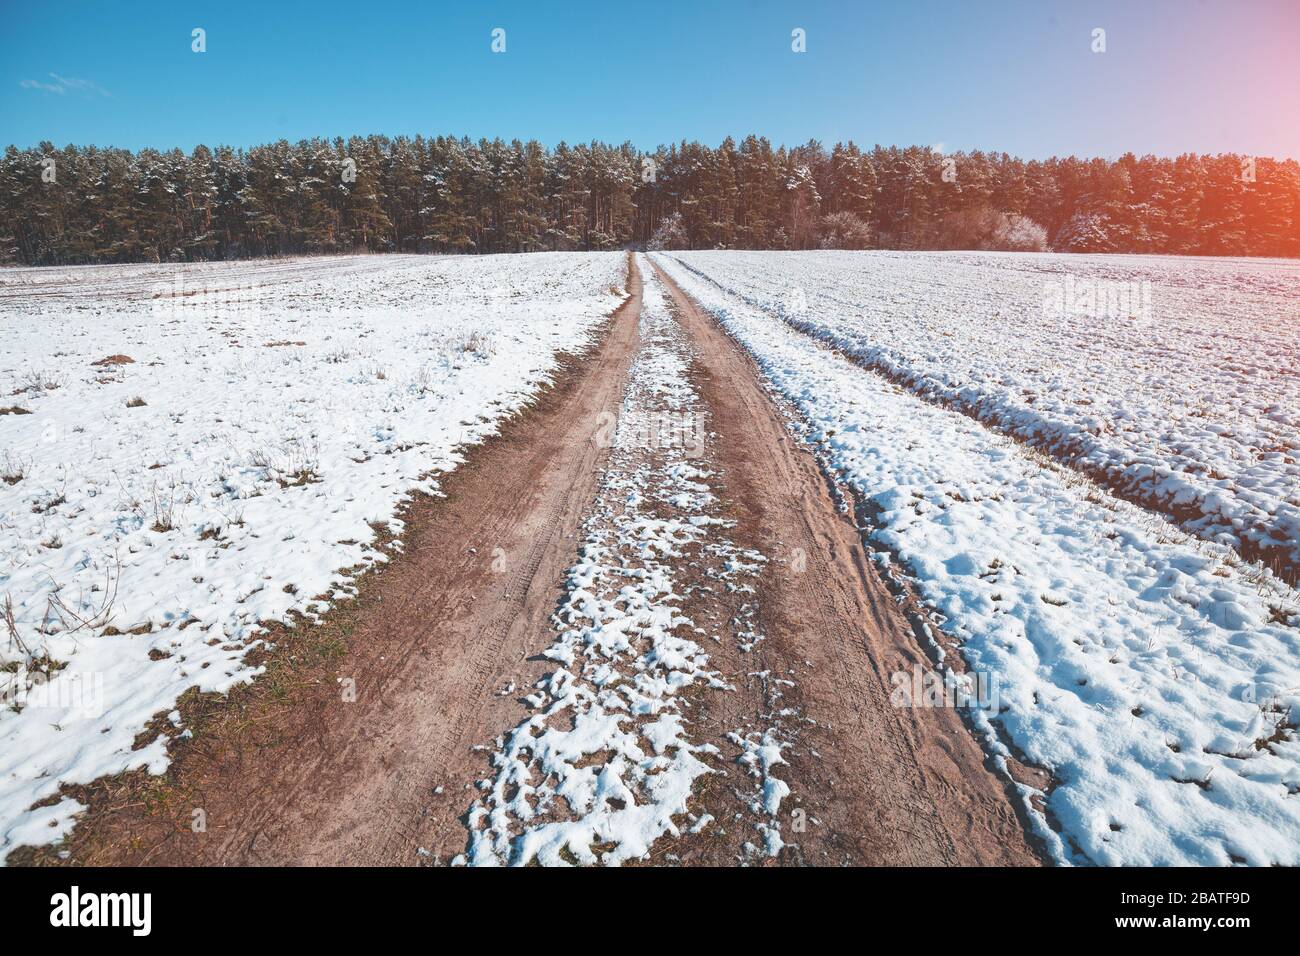 Rural winter landscape on a sunny day. Frosty weather. Dirt road in the field and pine forest on background Stock Photo